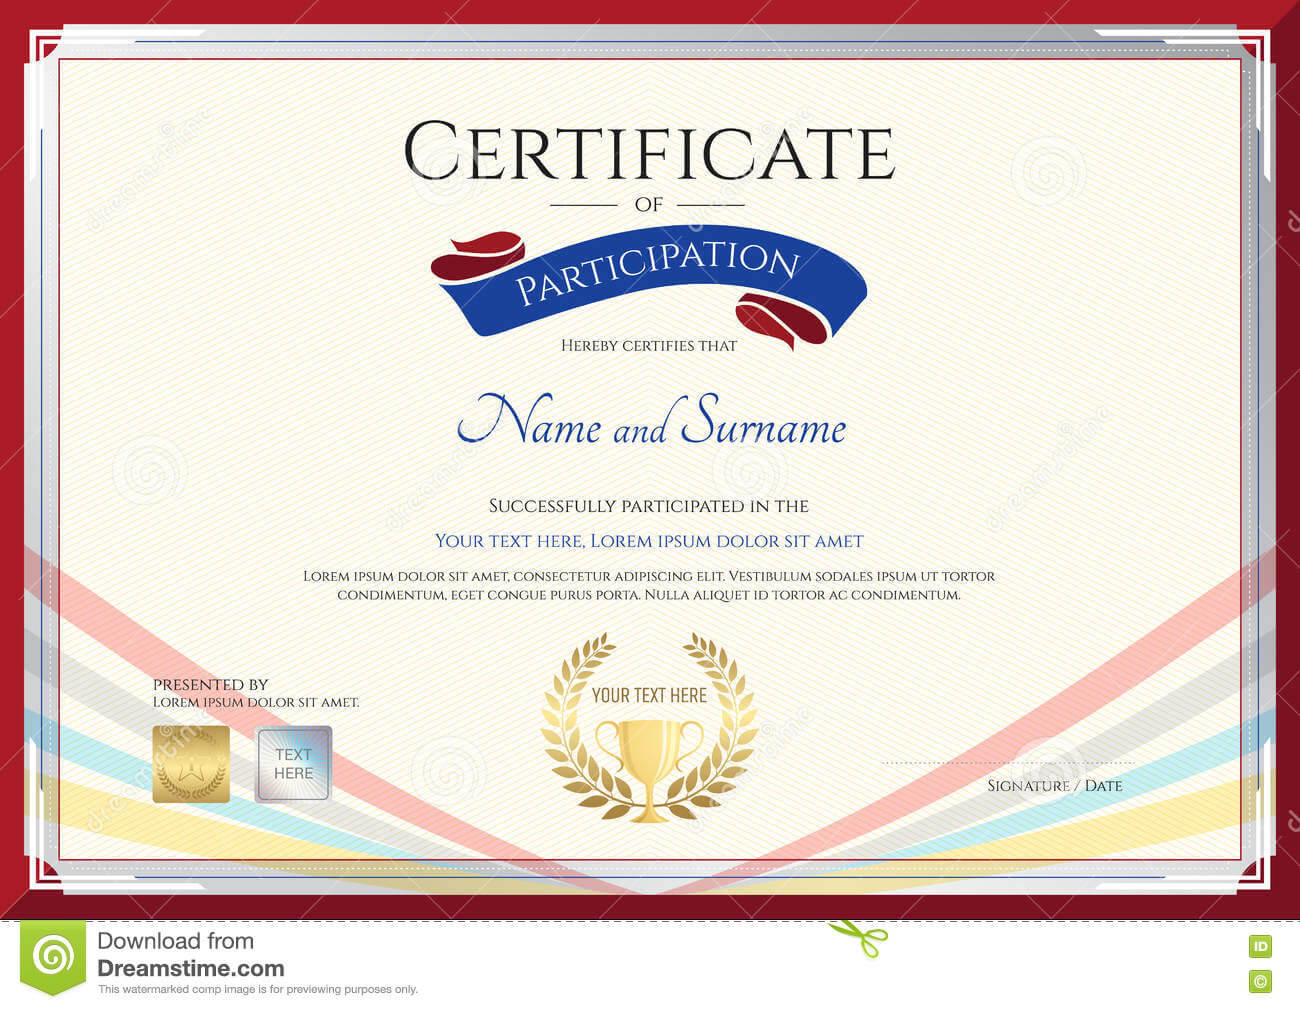 Certificate Template For Achievement, Appreciation Or In Conference Participation Certificate Template